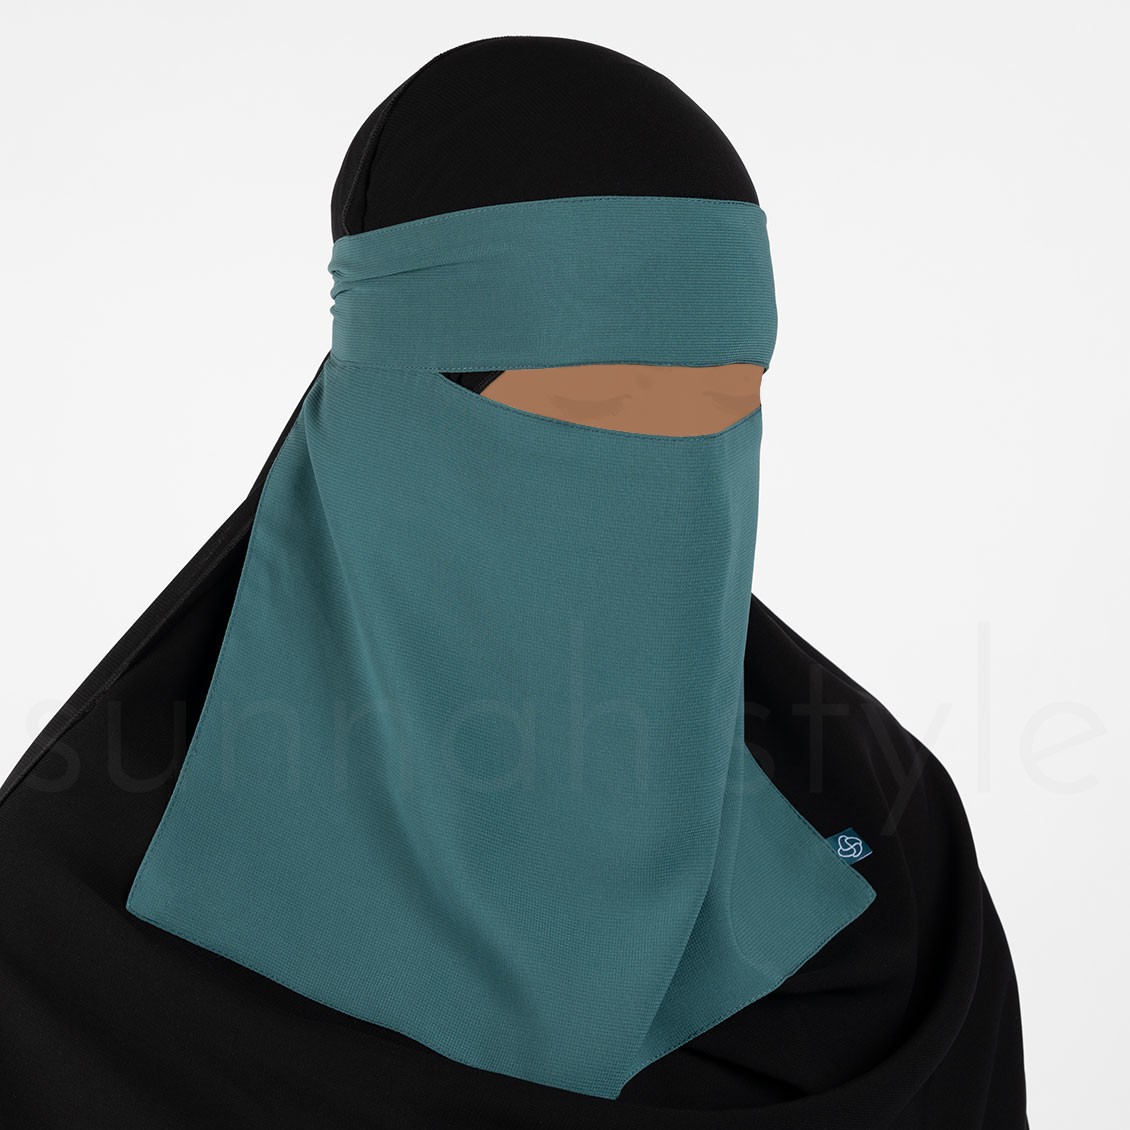 Sunnah Style Short One Layer Niqab Teal